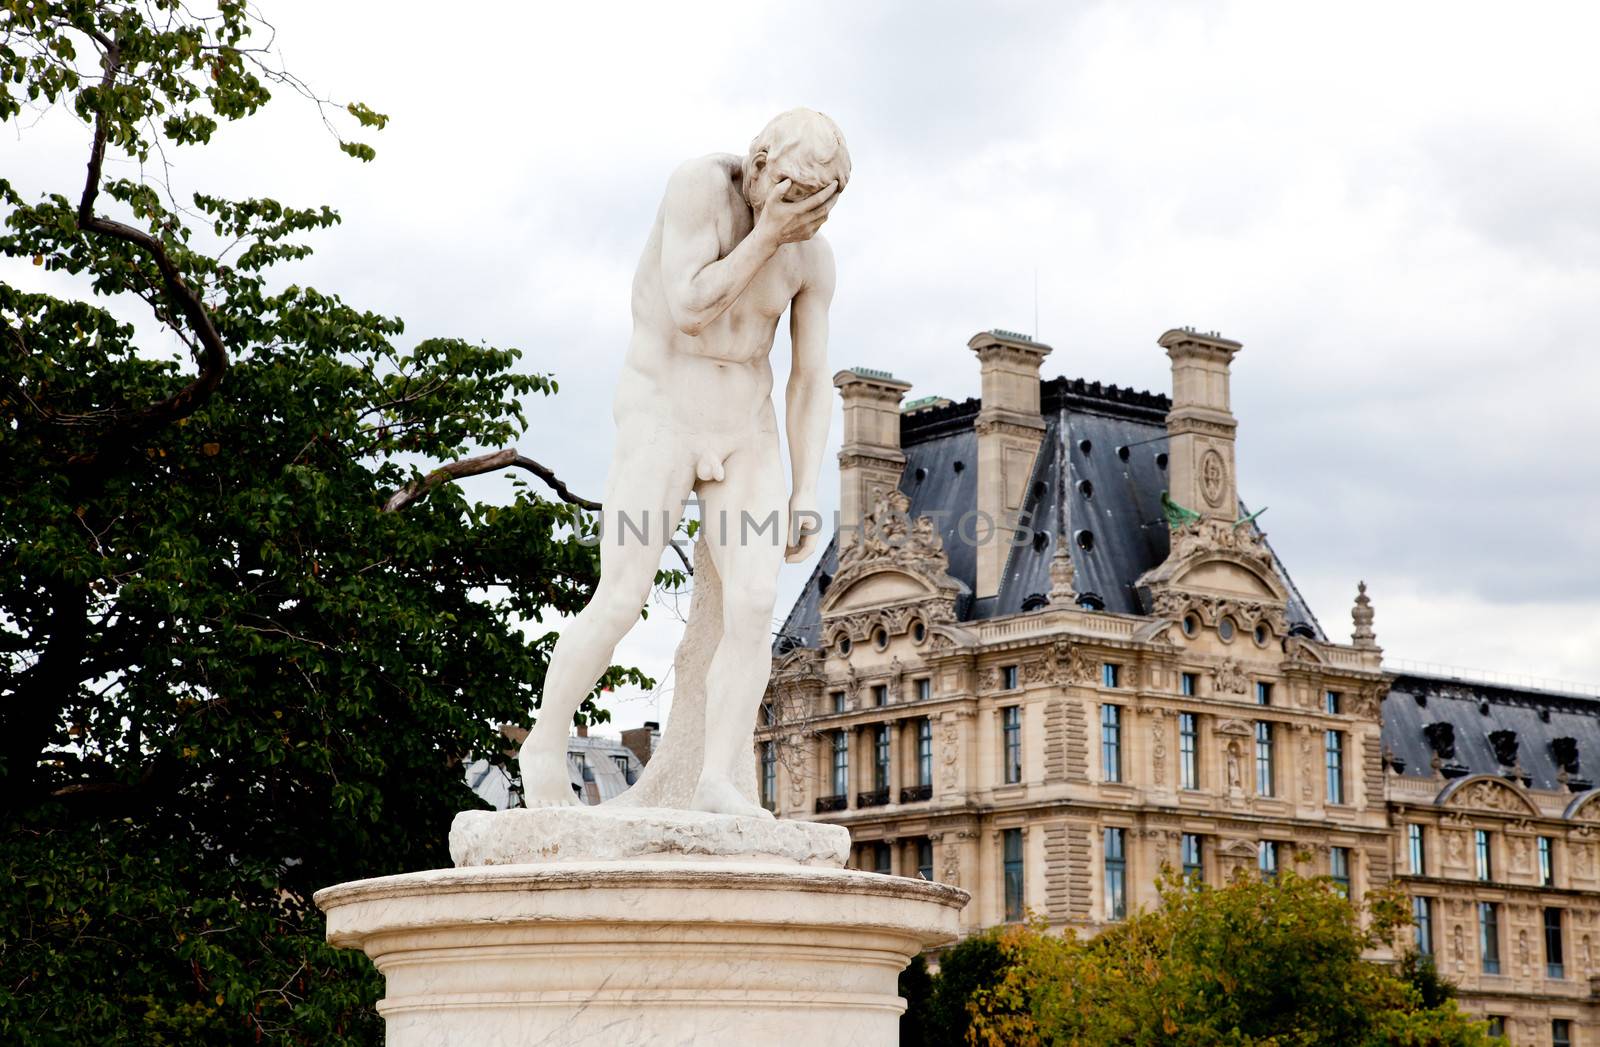 Paris - Statue from Tuileries garden near Louvre by gary718